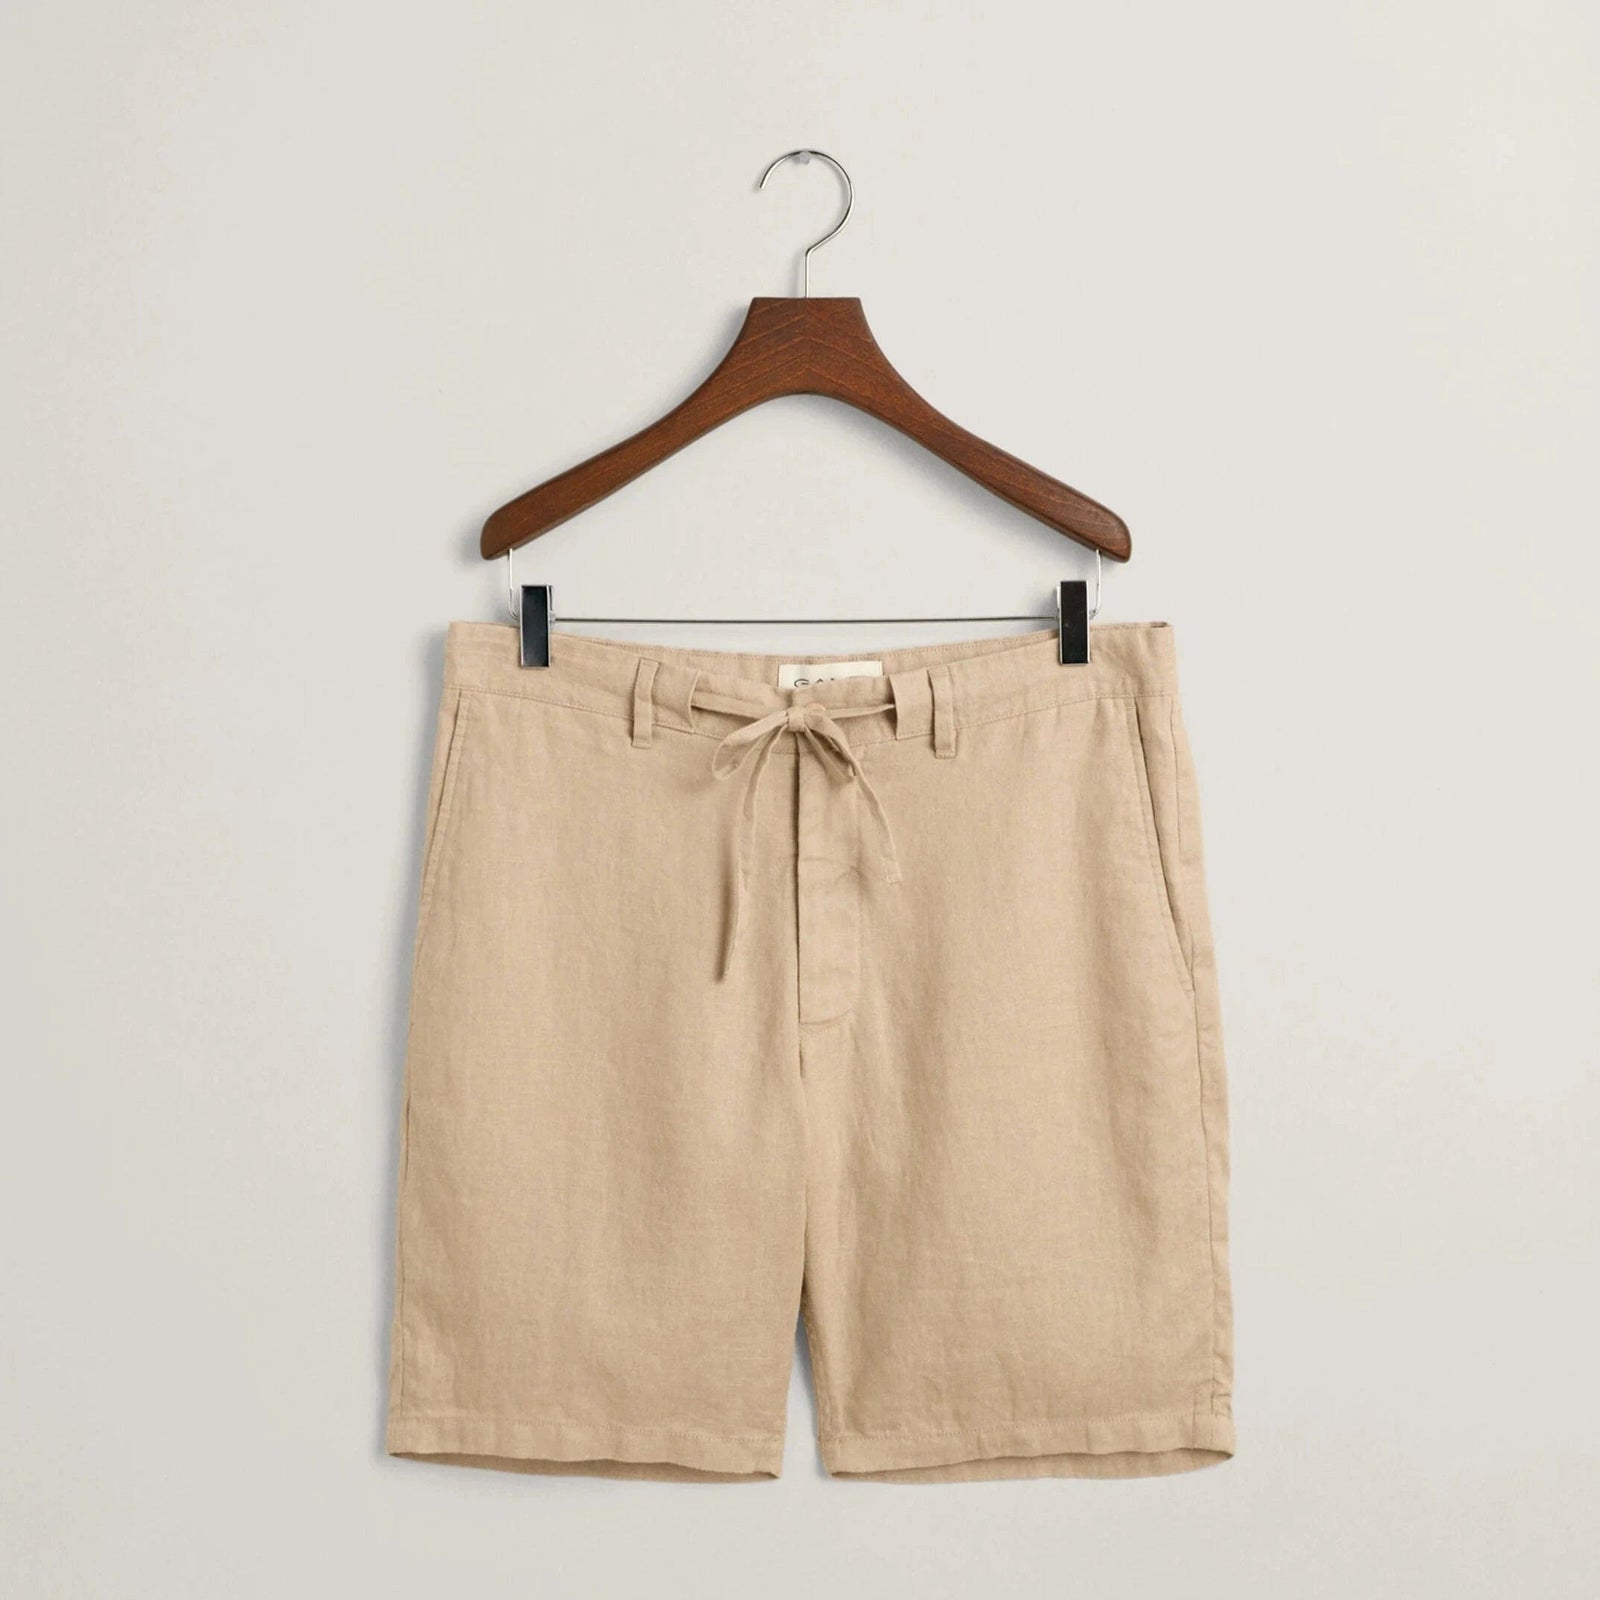 Gant Relaxed Fit Linen Drawstring Shorts in Dry Sand